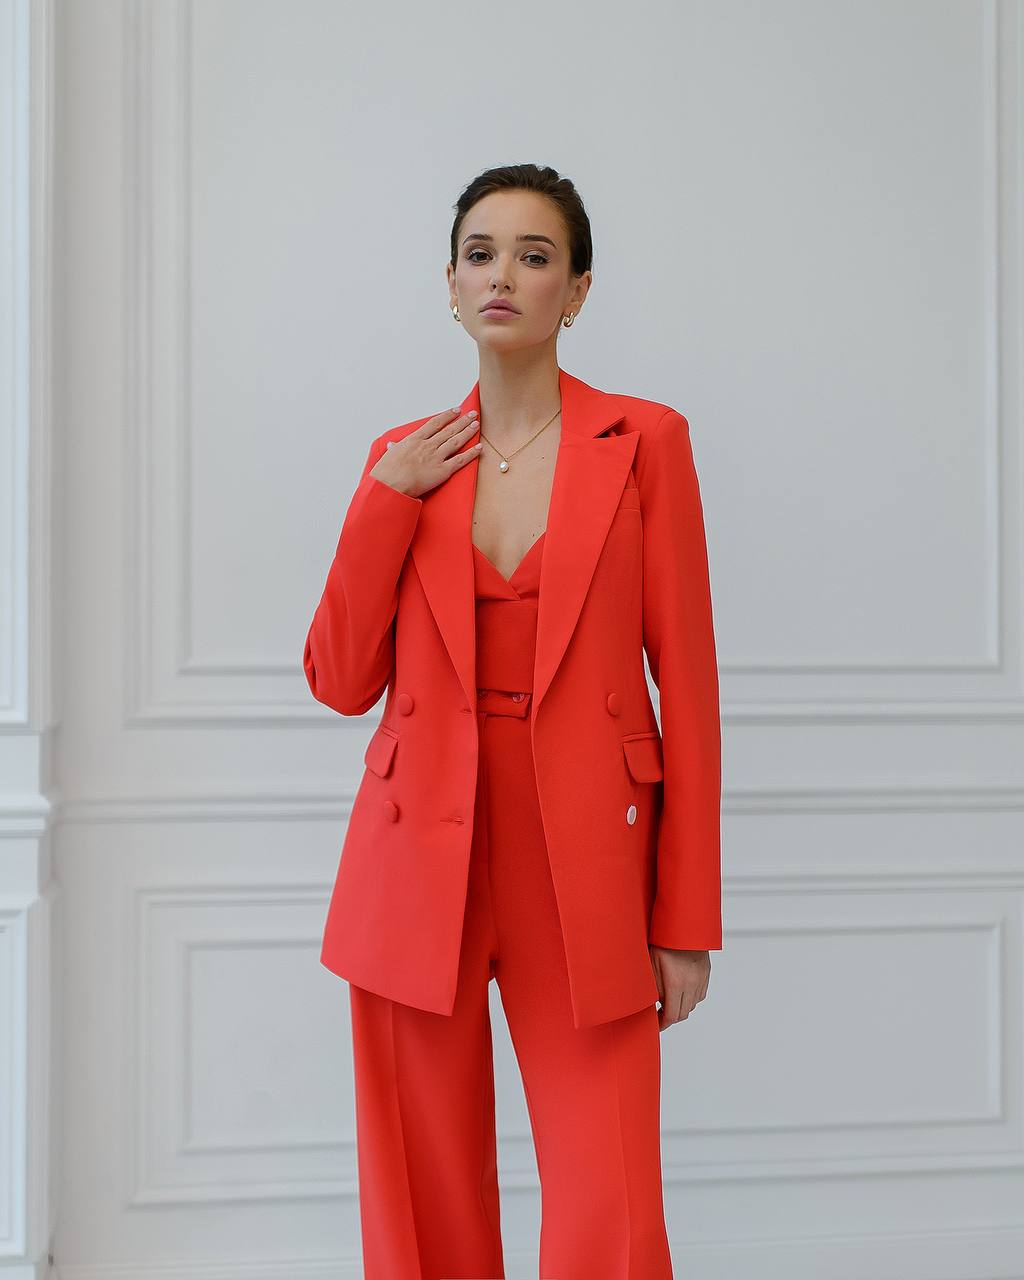 a woman in a red suit stands in front of a white wall